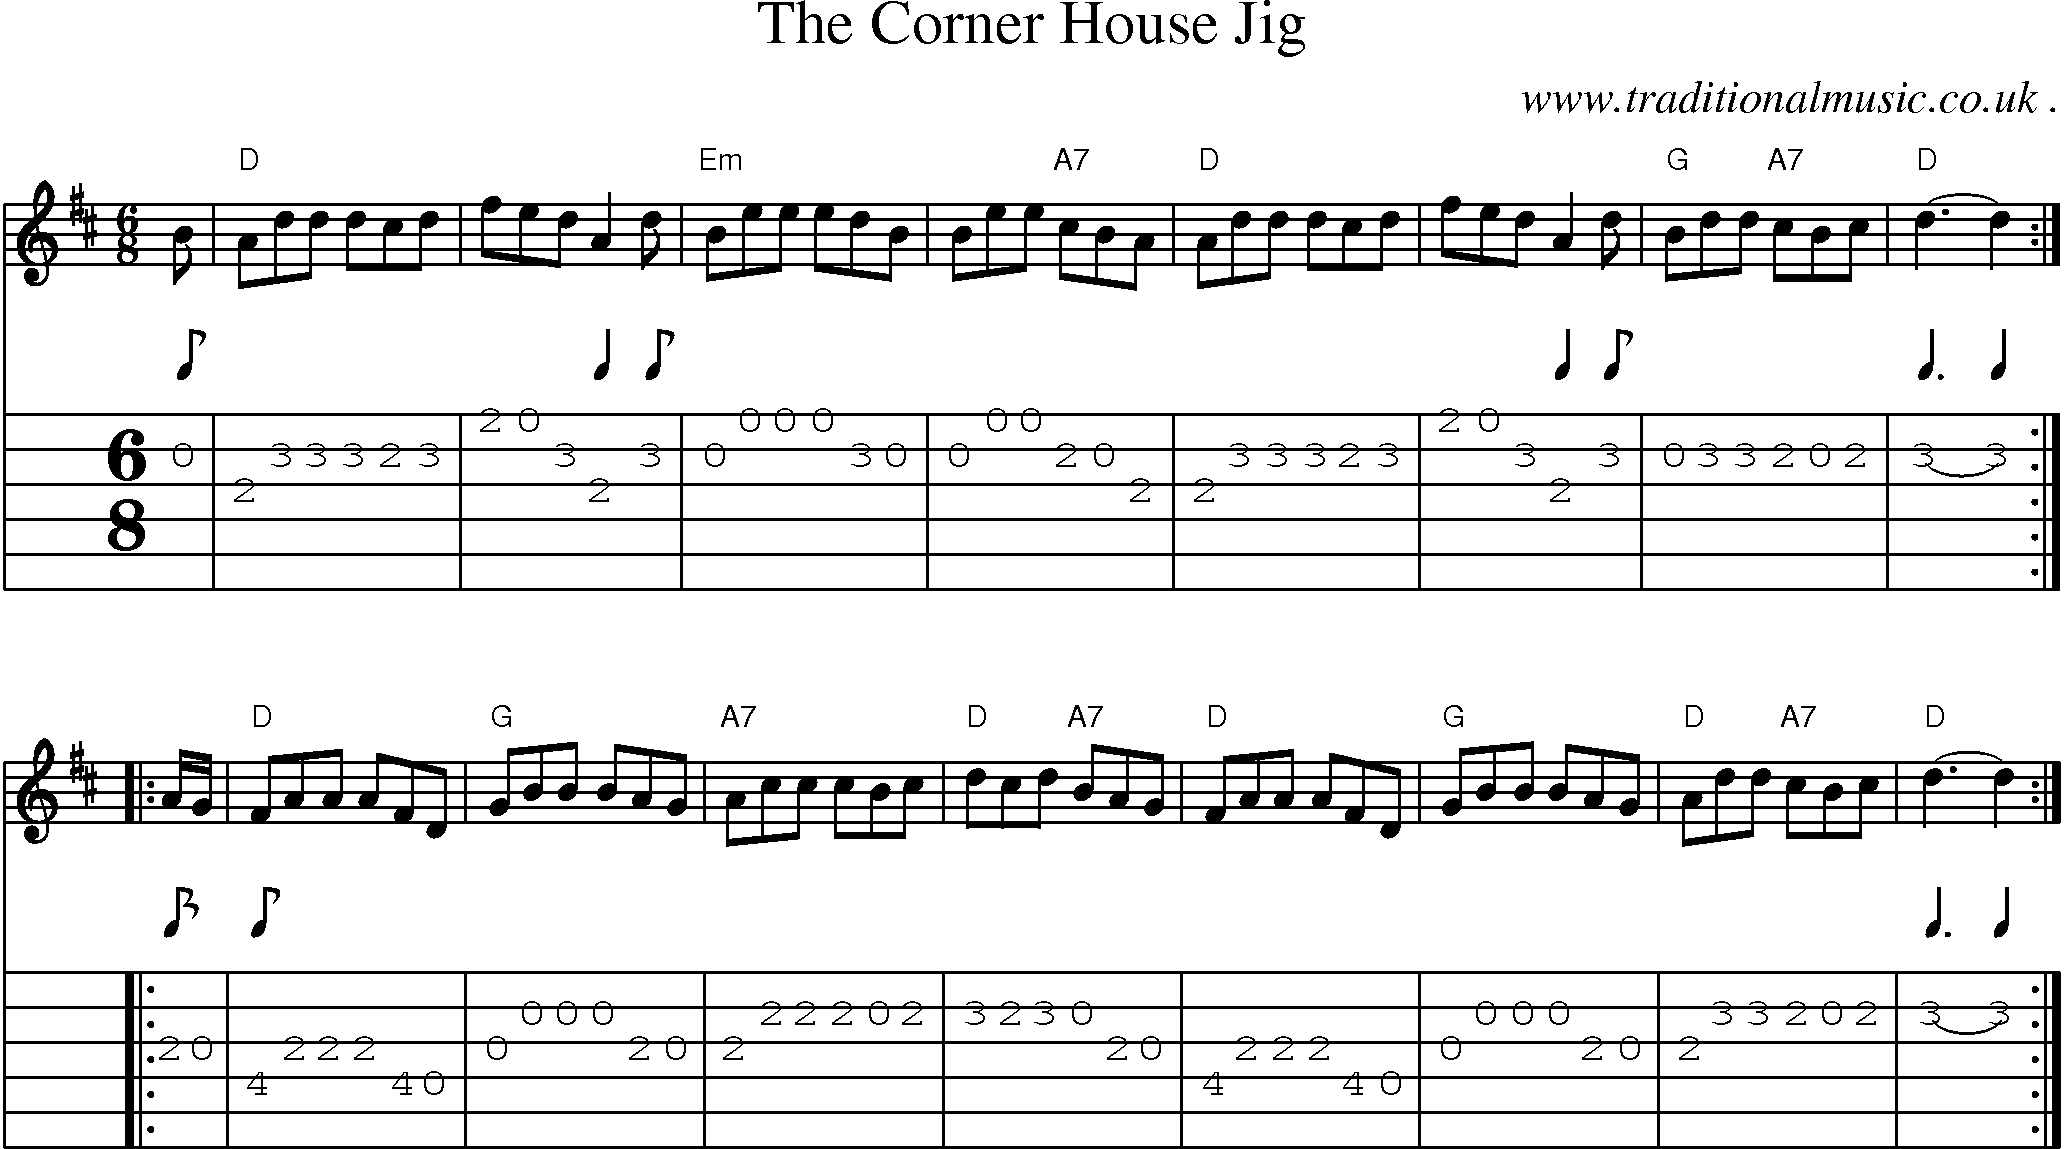 Sheet-music  score, Chords and Guitar Tabs for The Corner House Jig